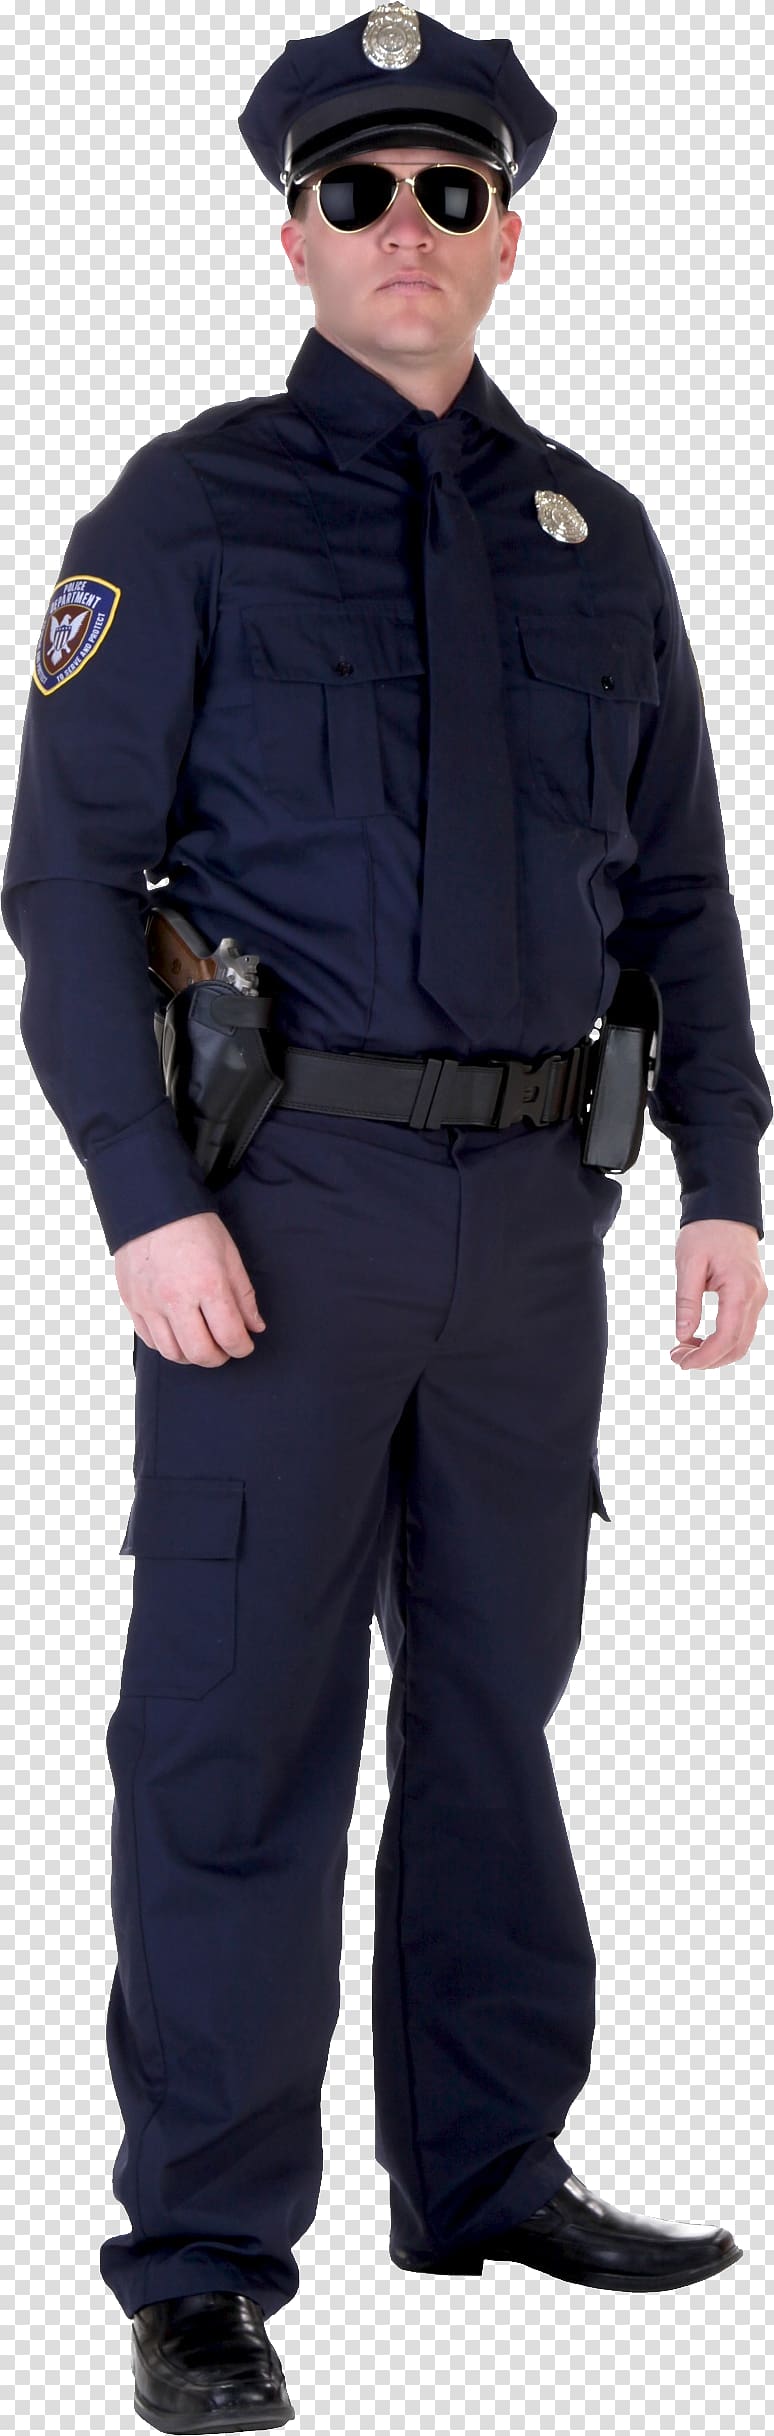 police officer rendered illustration, Couple costume Police officer Halloween costume, Policeman transparent background PNG clipart